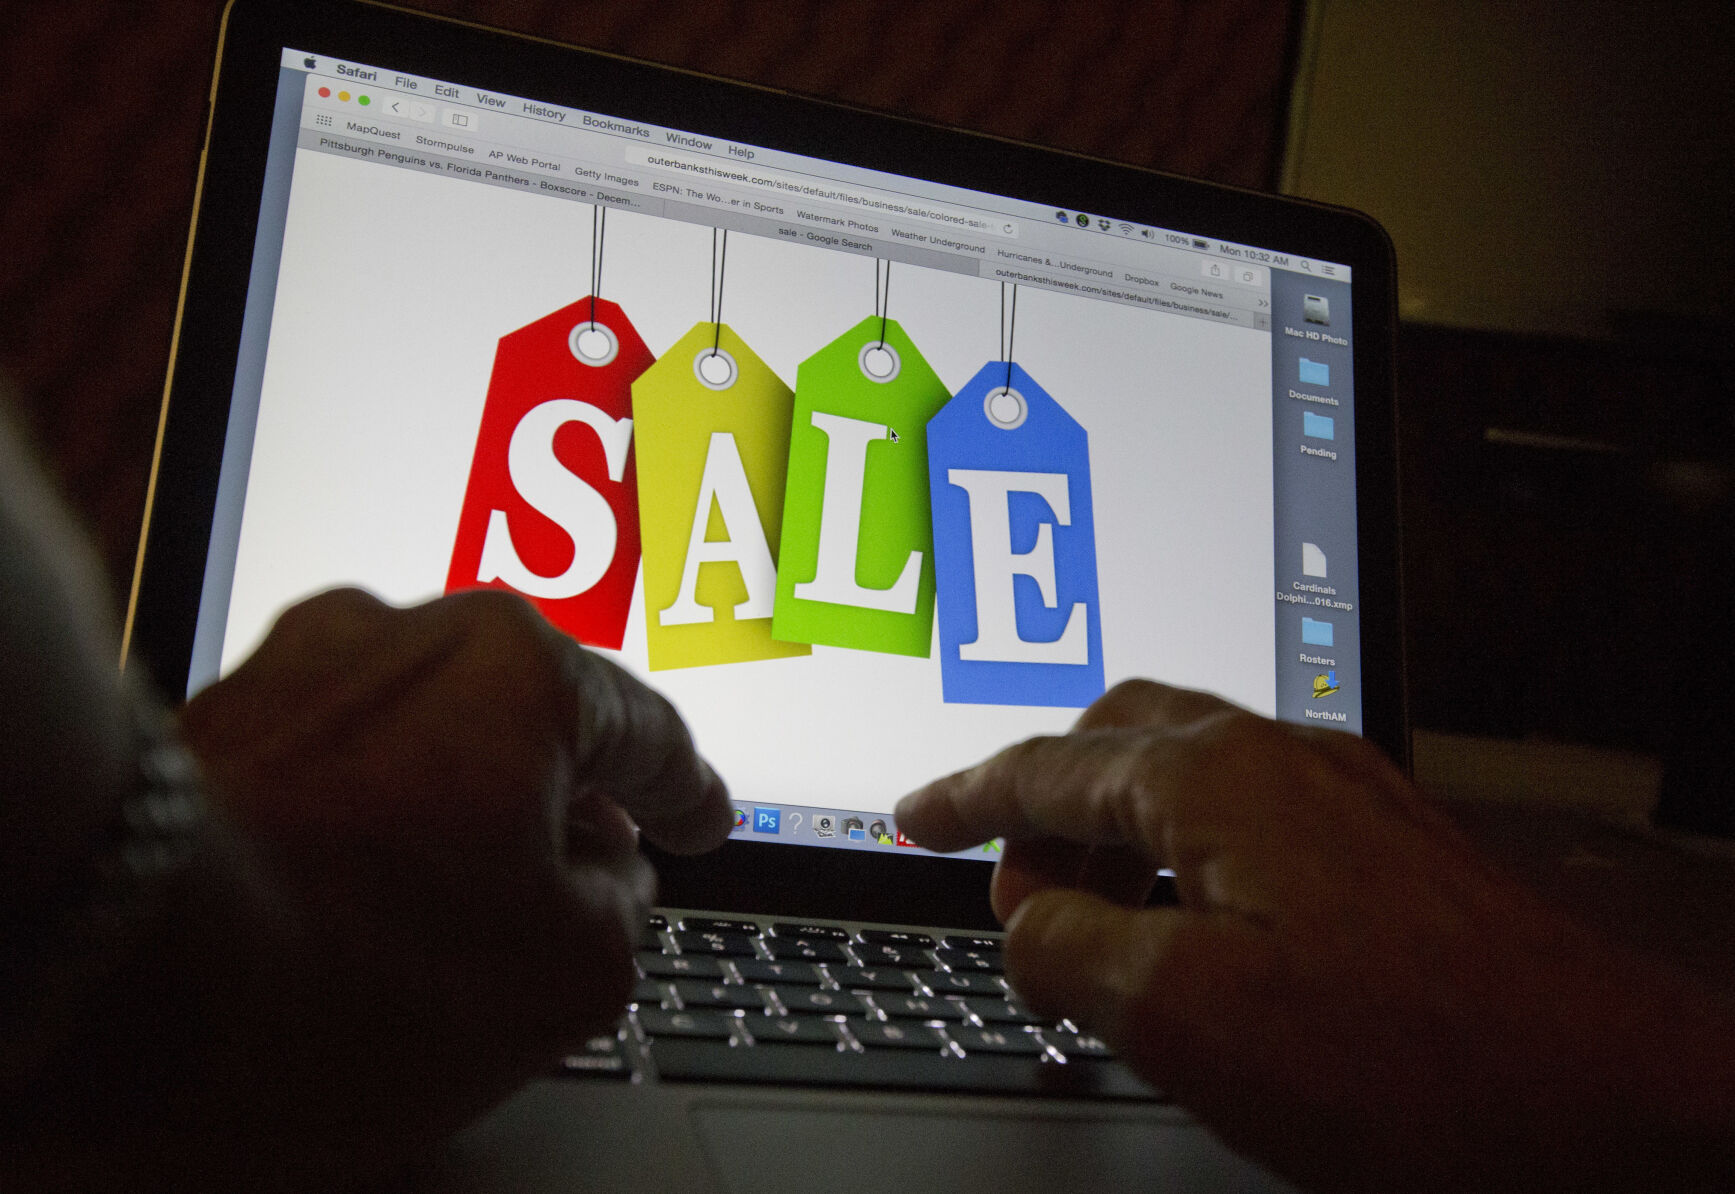 <p>In this Dec. 12, 2016, photo, a person searches the internet for sales, in Miami. Days after flocking to stores on Black Friday, consumers are turning online for Cyber Monday to score more discounts on gifts and other items that have ballooned in price because of high inflation. Adobe Analytics, which tracks transactions for top online retailers, forecasts Cyber Monday will remain the year’s biggest online shopping day and rake in up to $11.6 billion in sales. (AP Photo/Wilfredo Lee)</p>   PHOTO CREDIT: Wilfredo Lee 